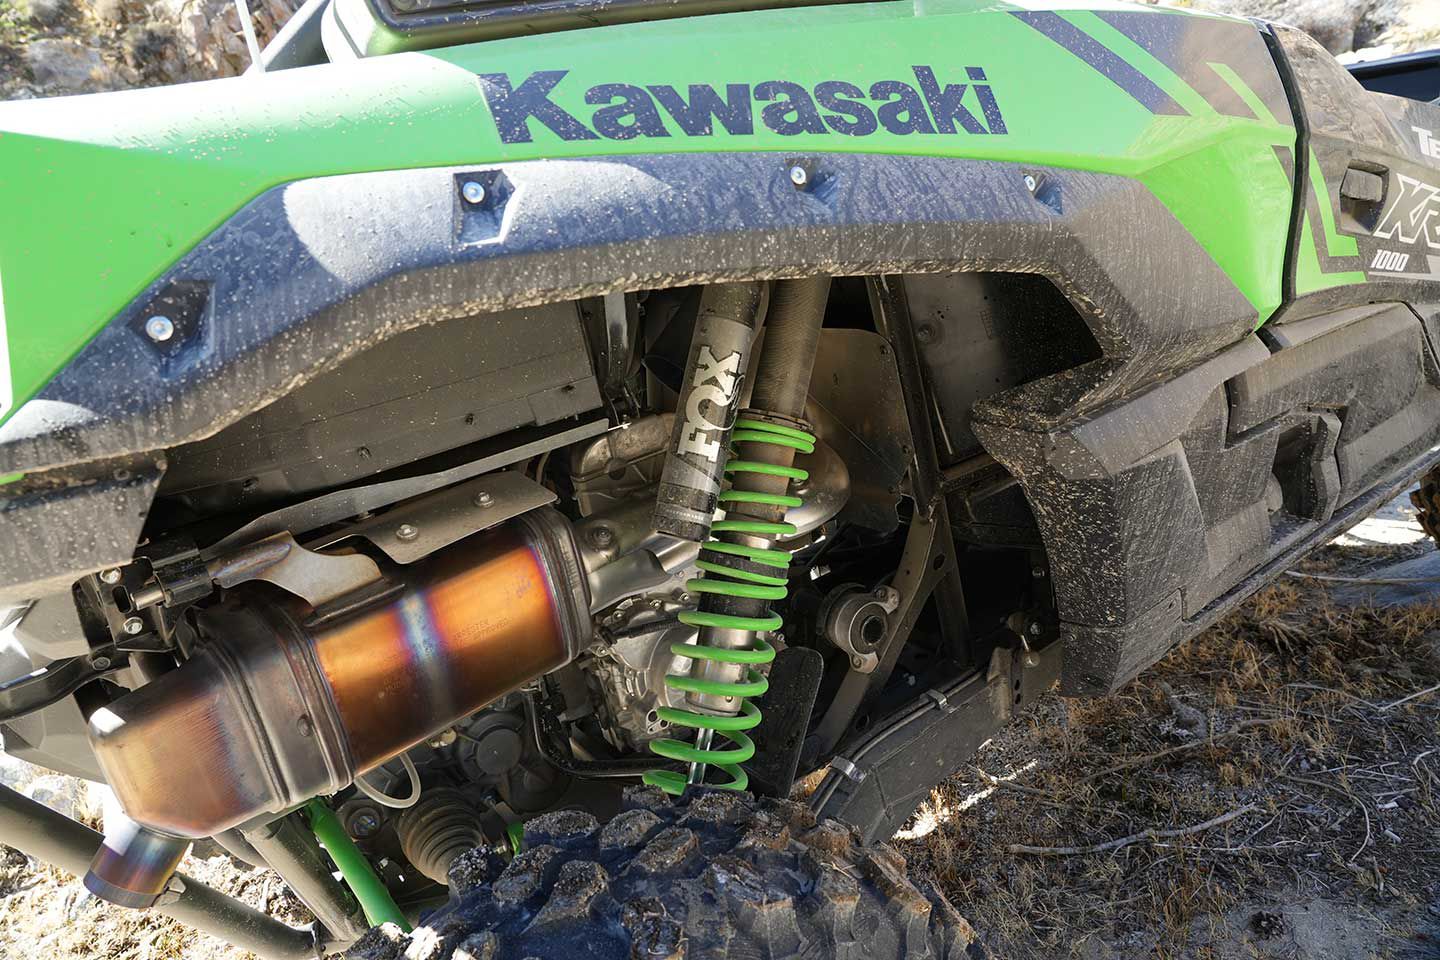 The Kawasaki Teryx KRX 1000 benefits from heavy-duty suspension components that soak up rough terrain with ease. It’s a remarkably comfortable steed over uneven terrain.